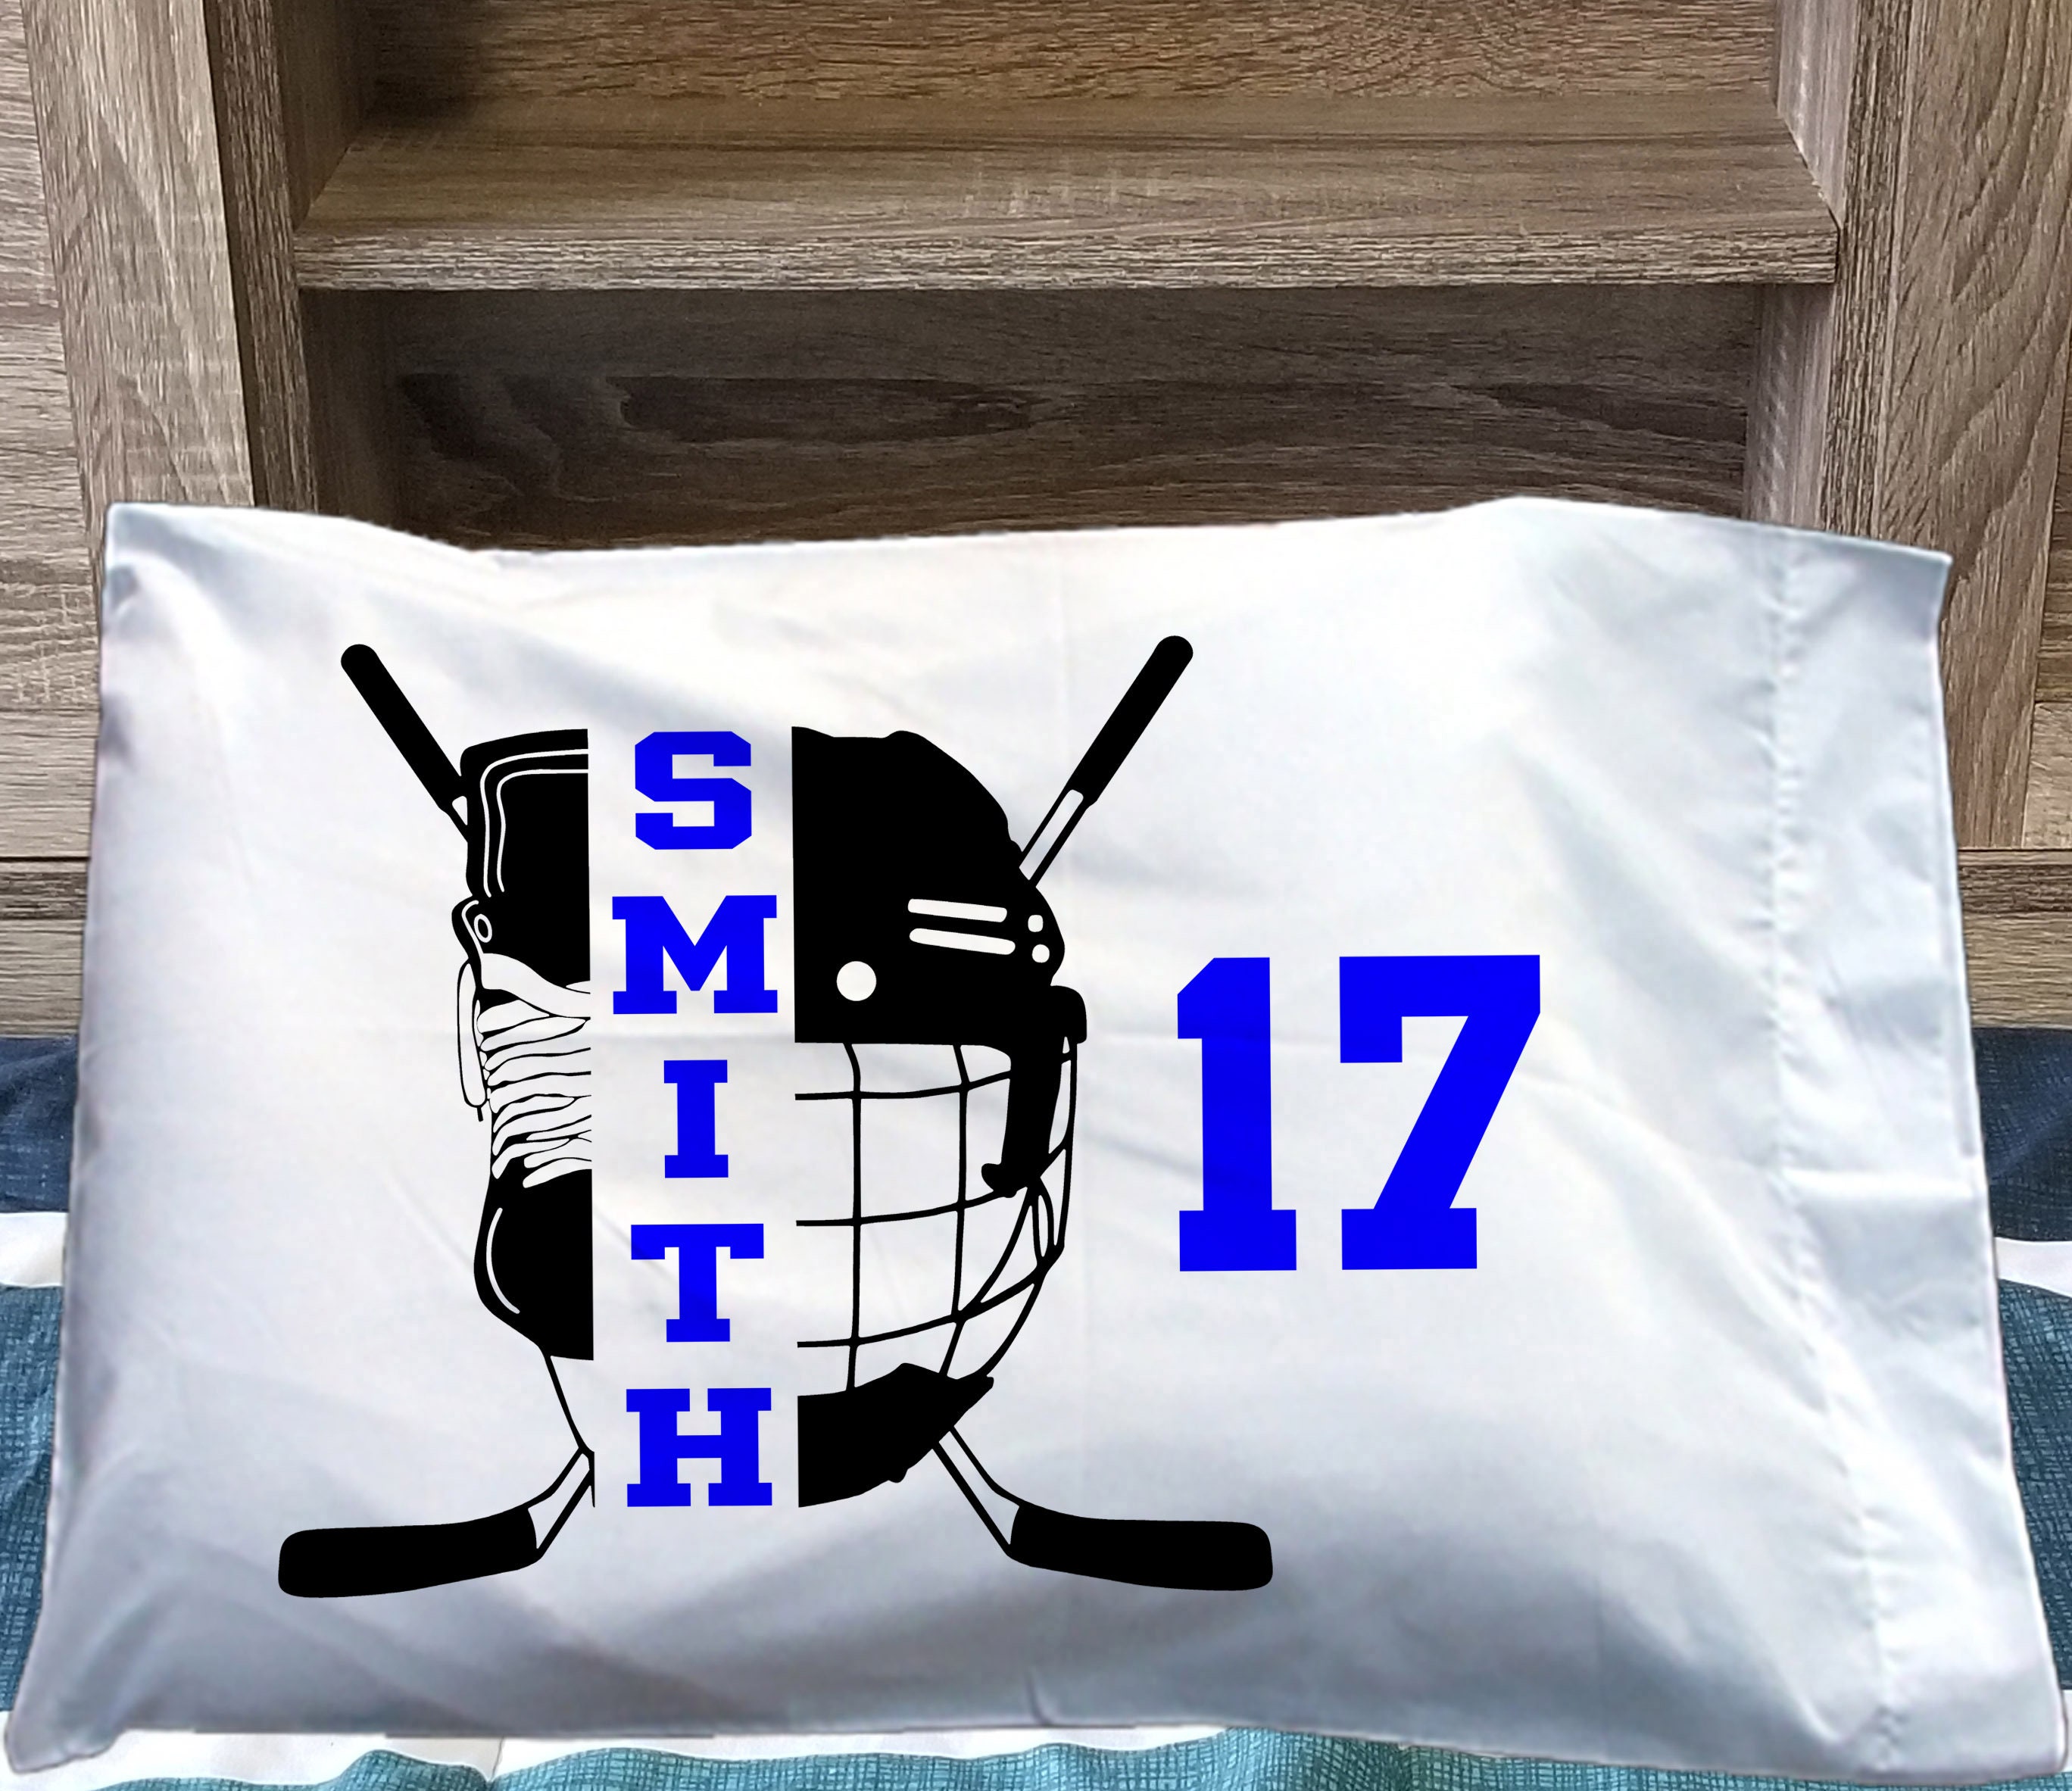 Personalized Hockey Pillow Case for Kids, Adults and Toddler